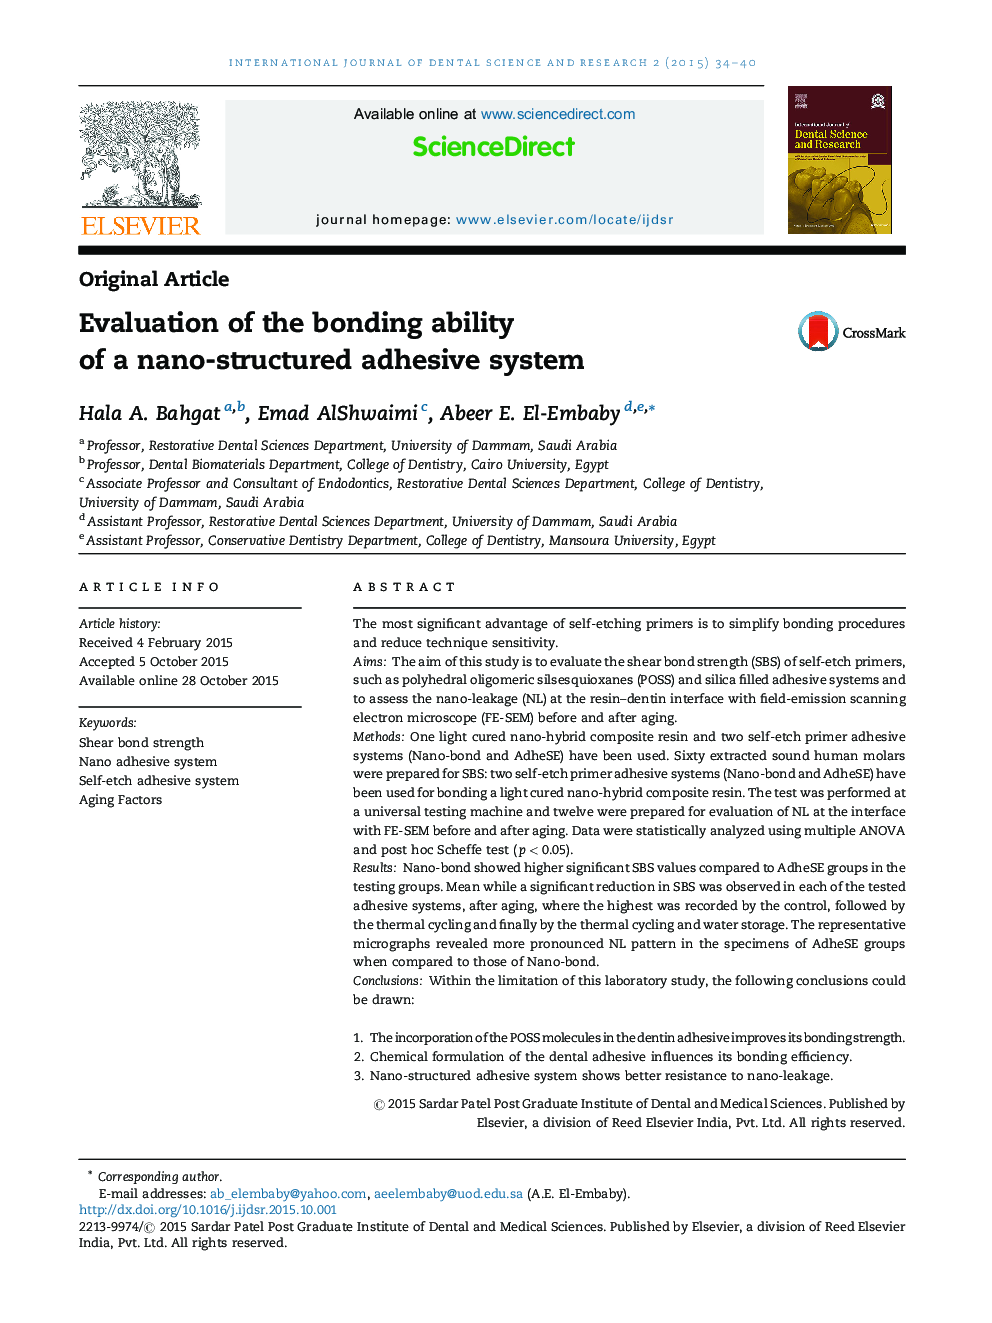 Evaluation of the bonding ability of a nano-structured adhesive system